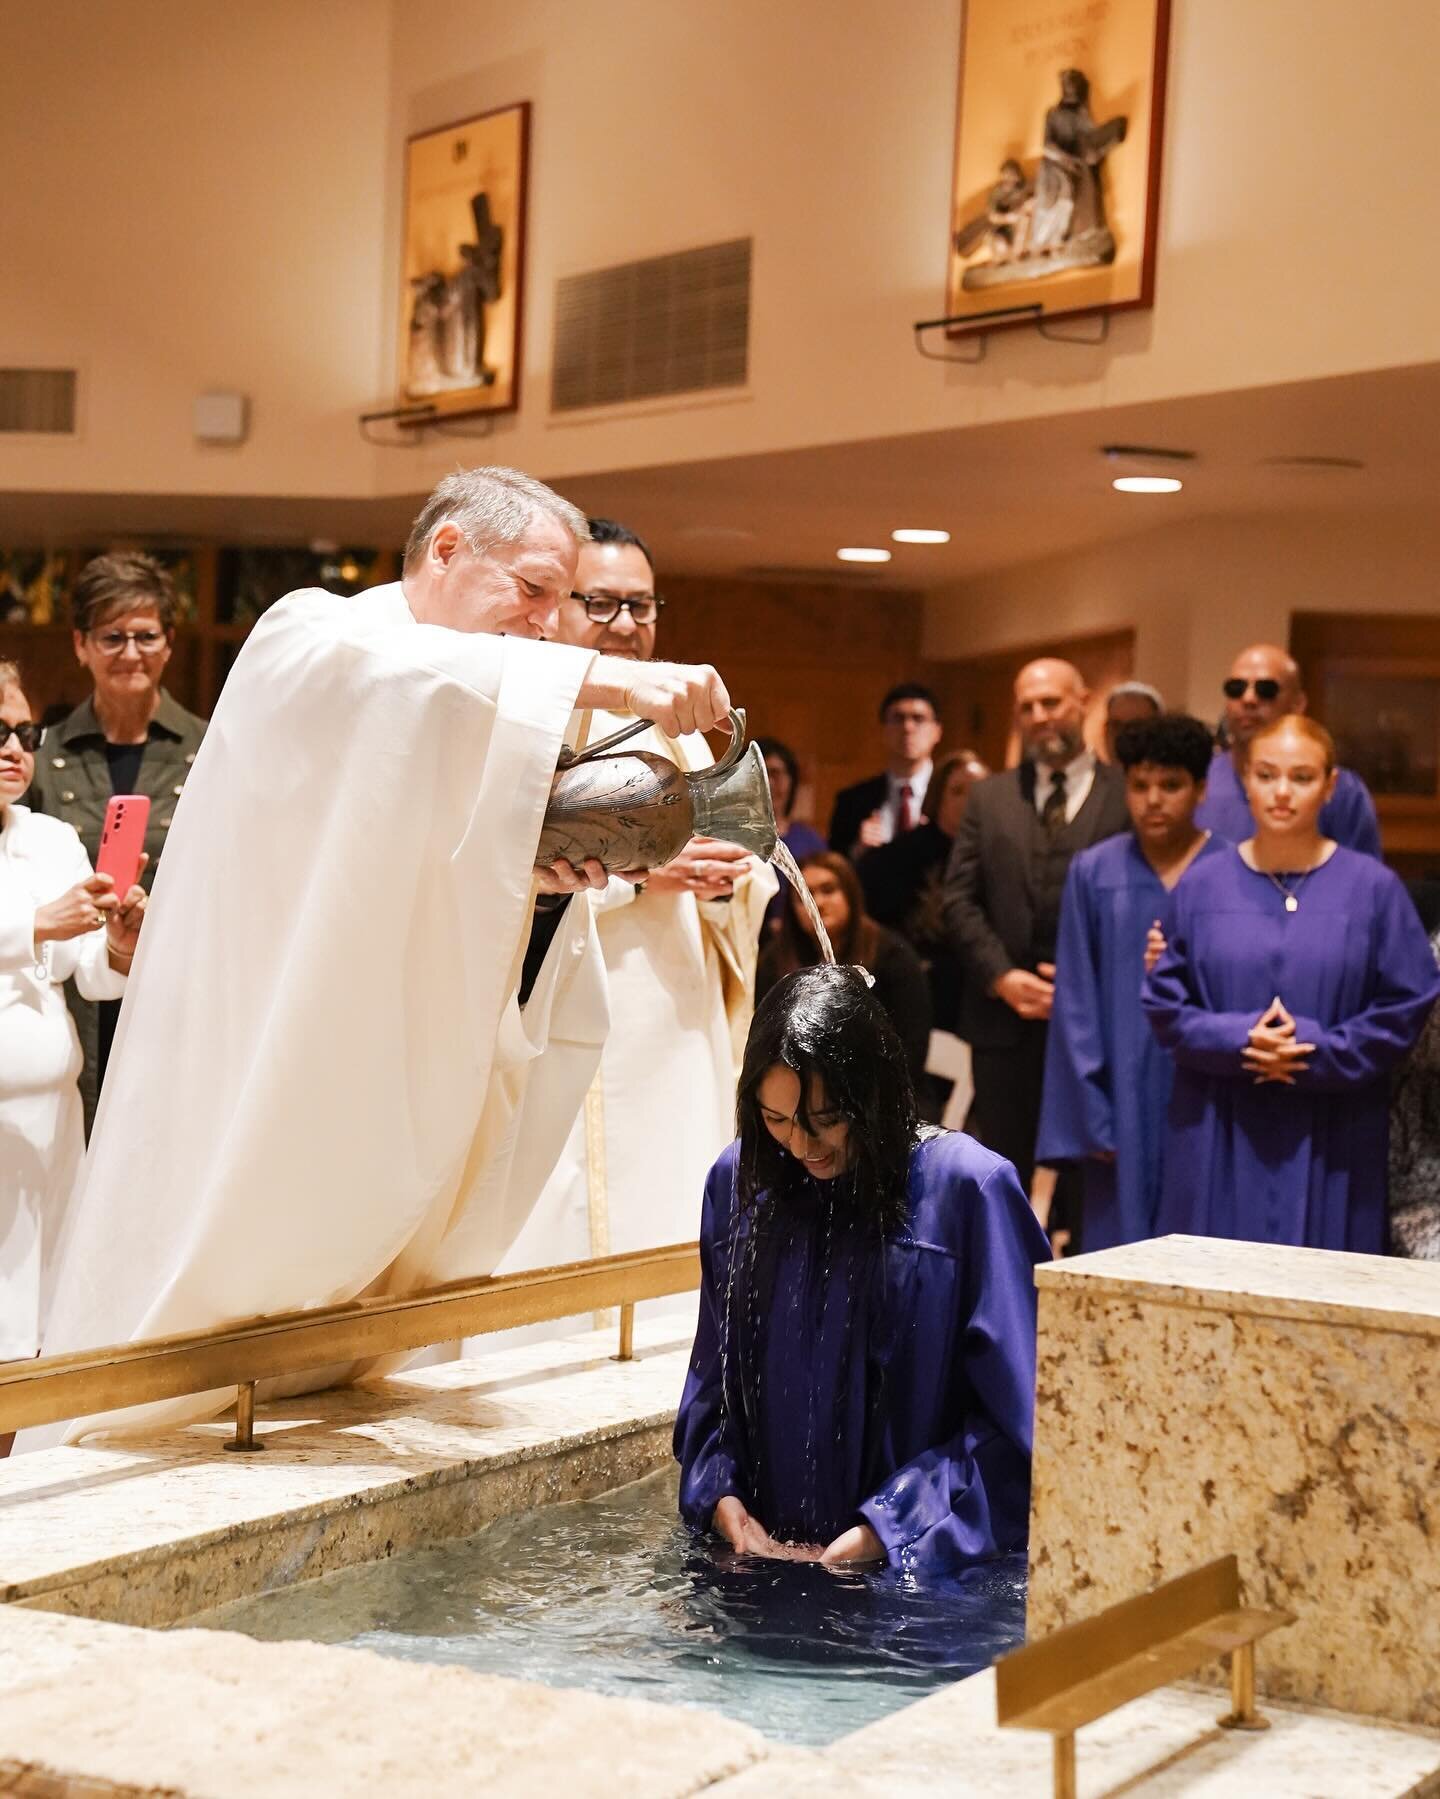 Welcome home to the 5 teens who were baptized and brought into the Church at this past Saturdays Easter Vigil! How beautiful was it to see 40 people enter the Church?! #catholic #baptism #welcomehome #easter